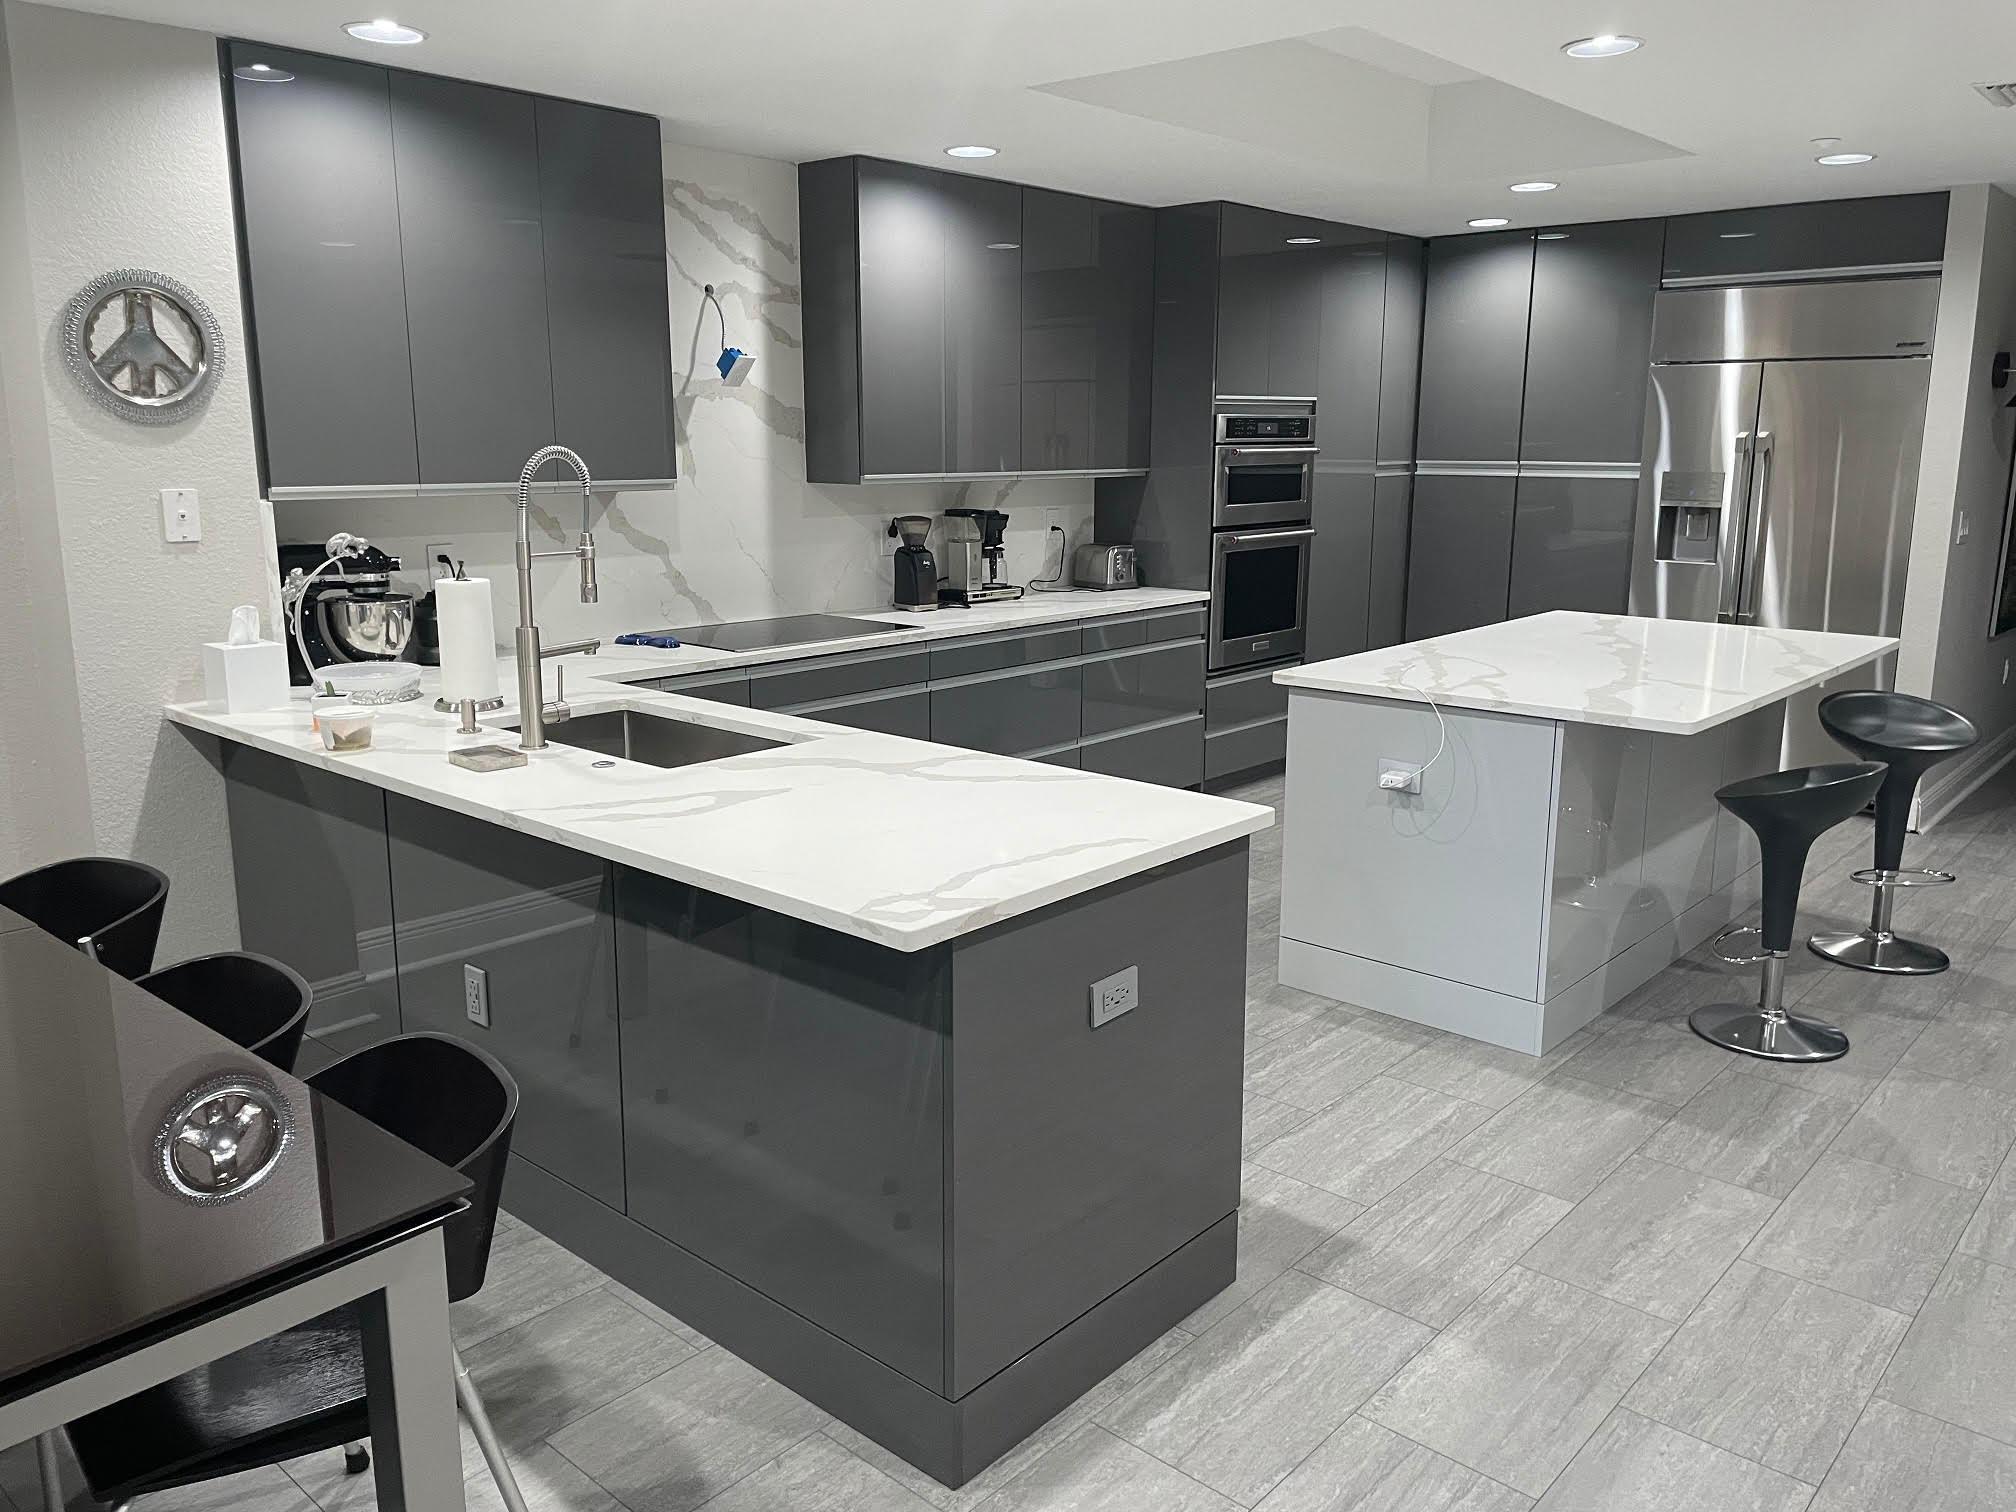 Re-A-Door Beautiful Ultra Modern High Gloss Grey Kitchen Cabinets and Cabinet Refacing in Tampa, Florida